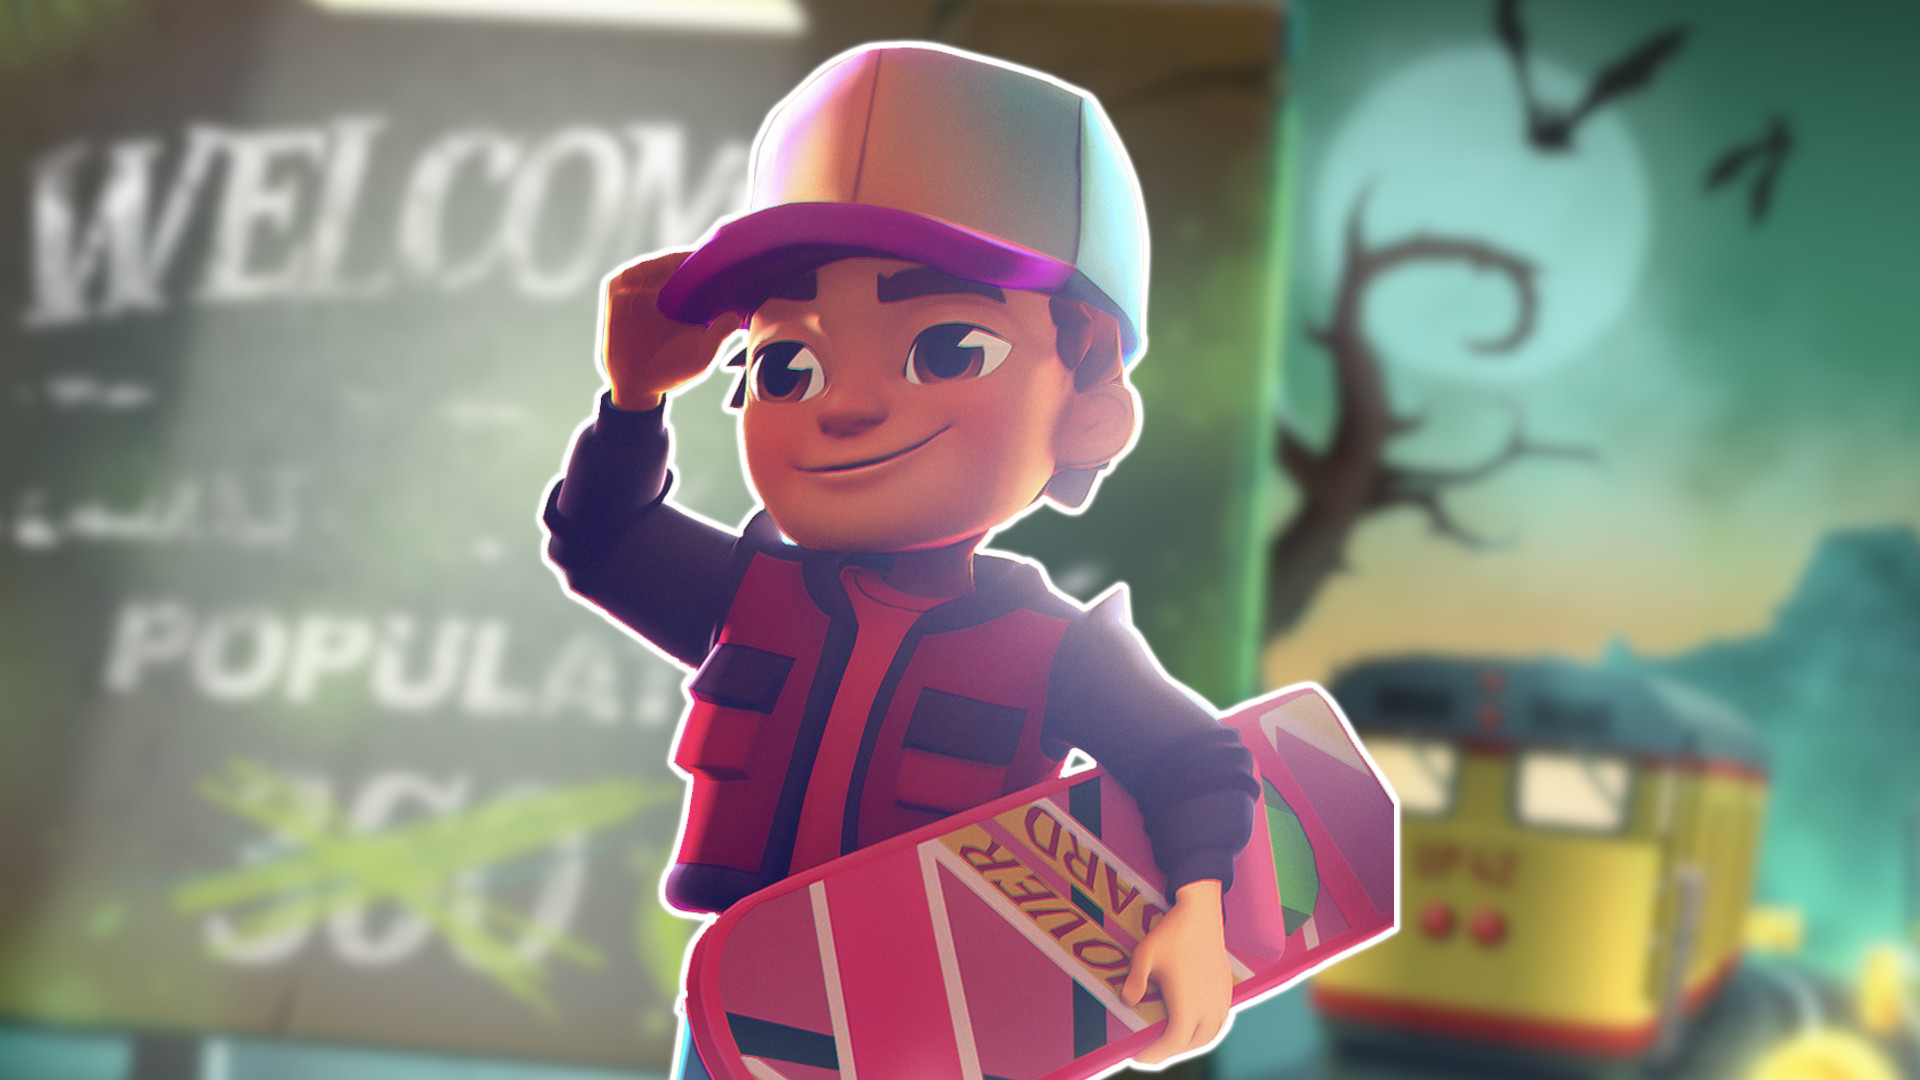 Subway Surfers - Subway Surfers updated their cover photo.